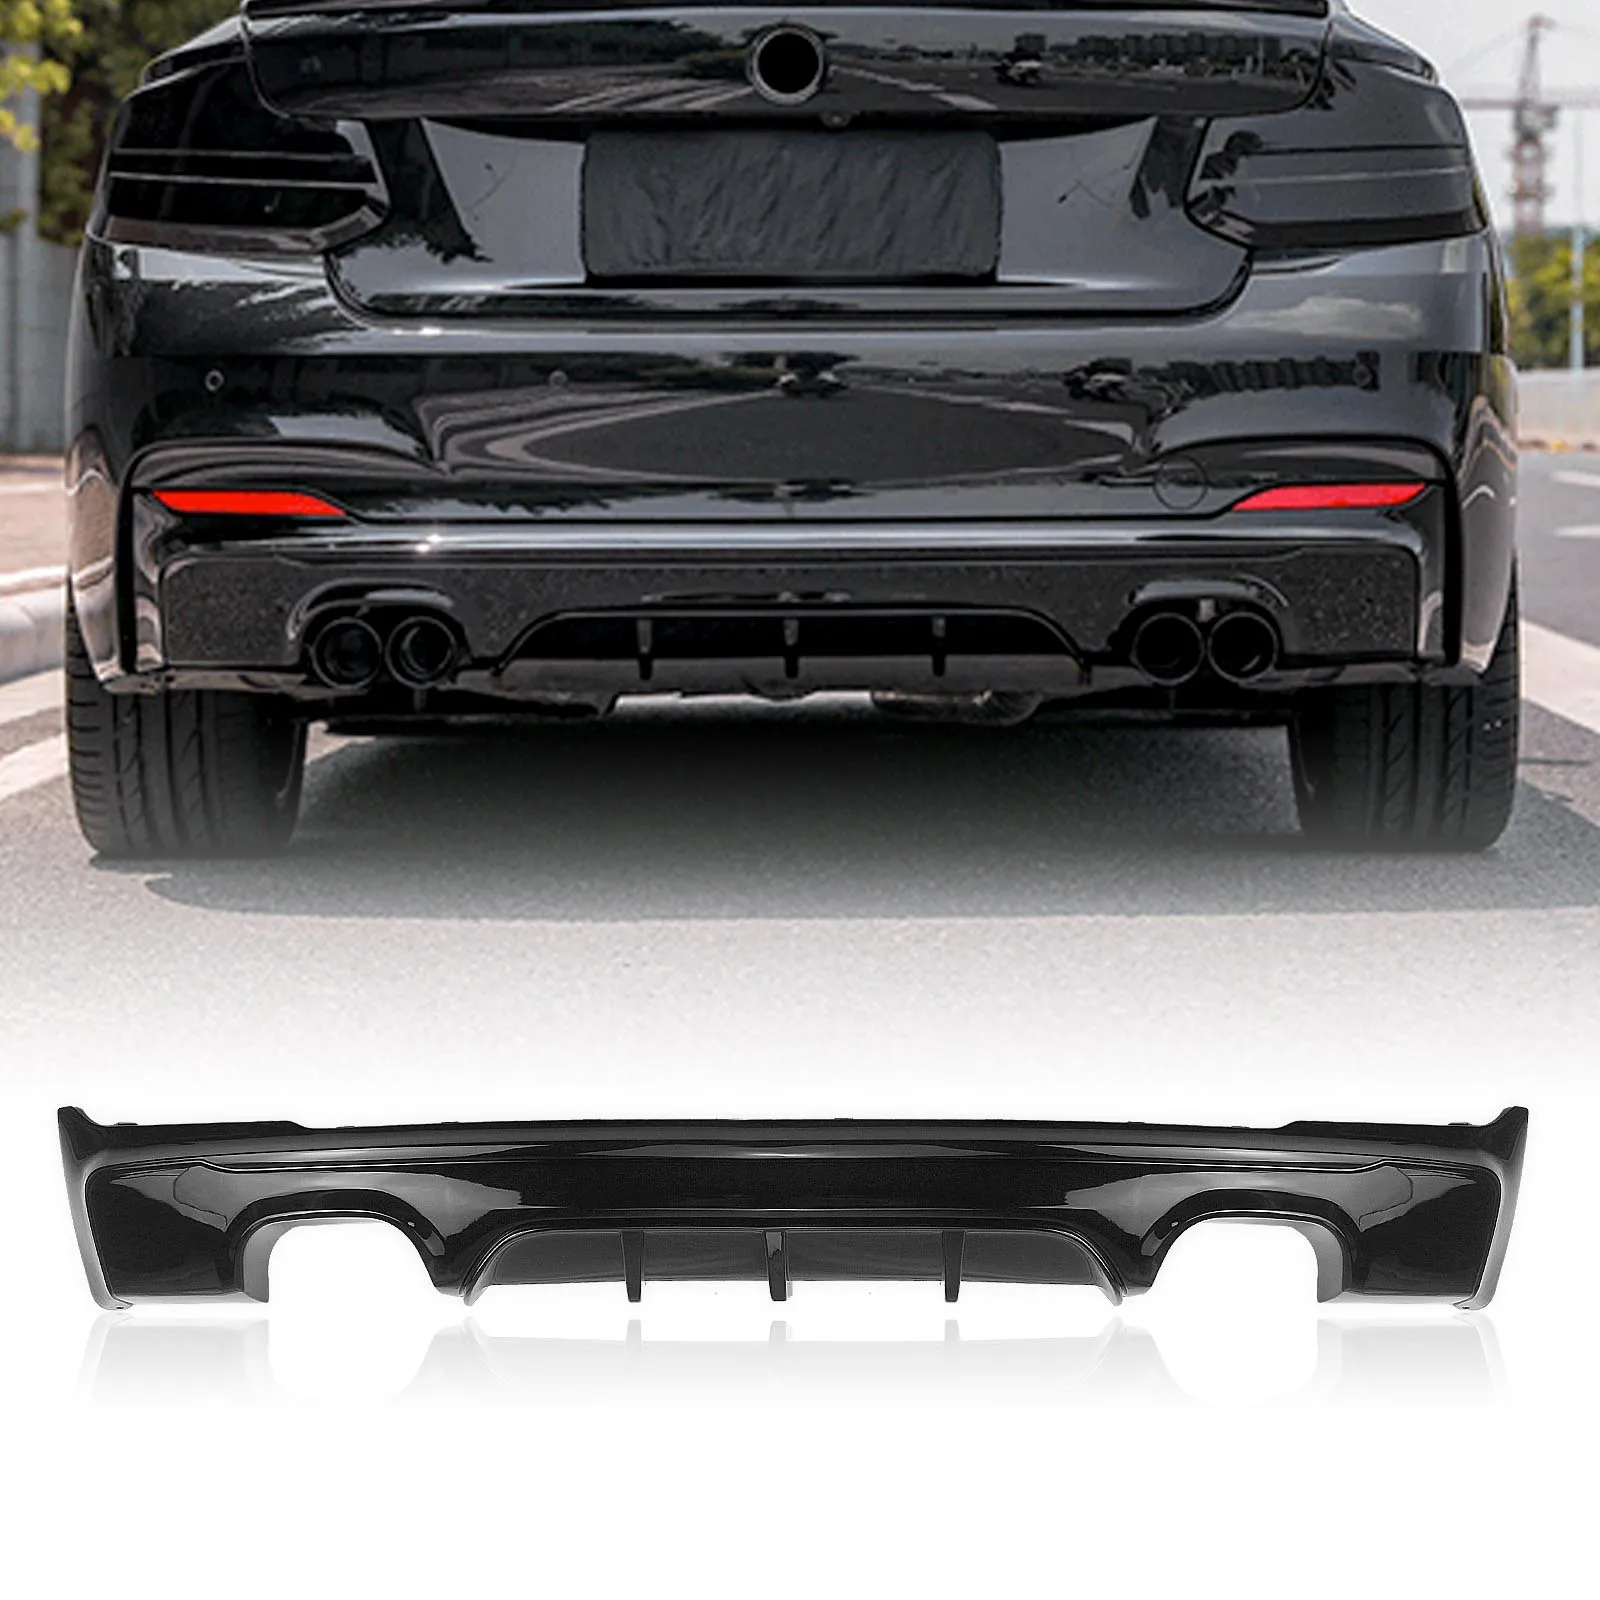 

Car Rear Bumper Diffuser Lip Quad Exhaust Lower Spoiler Plate Splitter Guard Body Kit For BMW 2 Series 2 Coupe 2014-2020